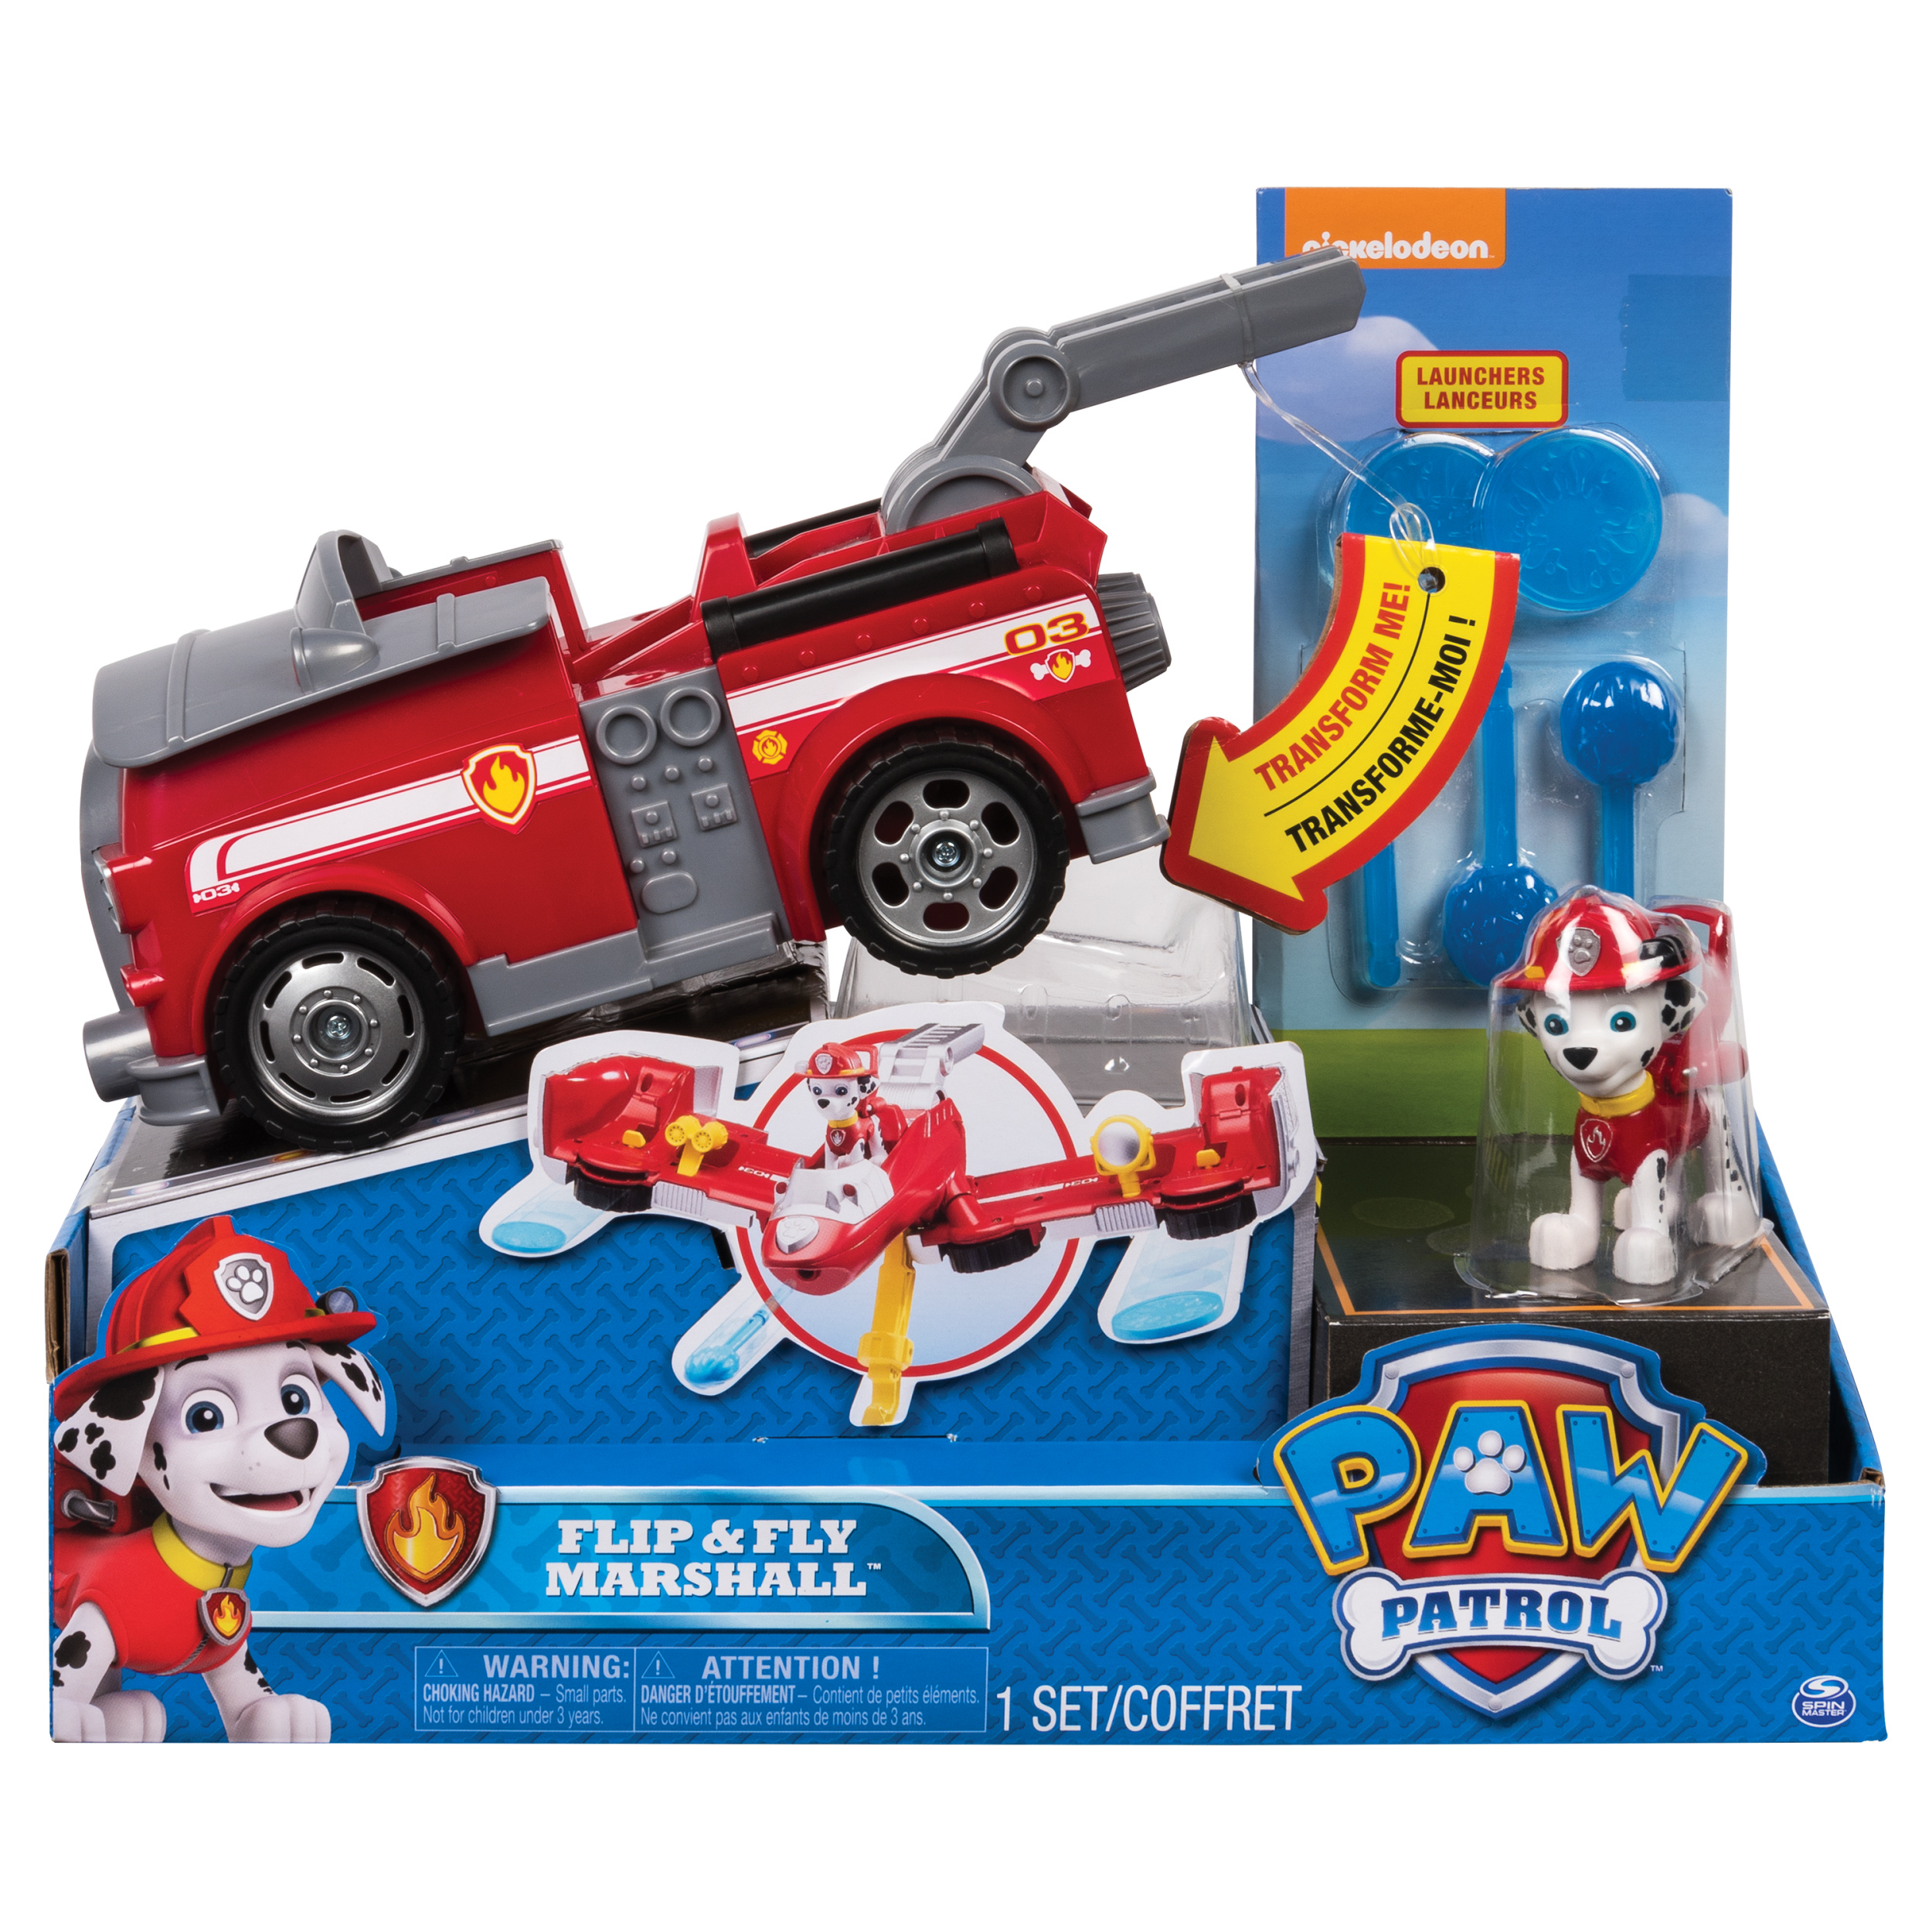 Paw Patrol - Flip & Fly Marshall, 2-in-1 Transforming Vehicle - image 5 of 8